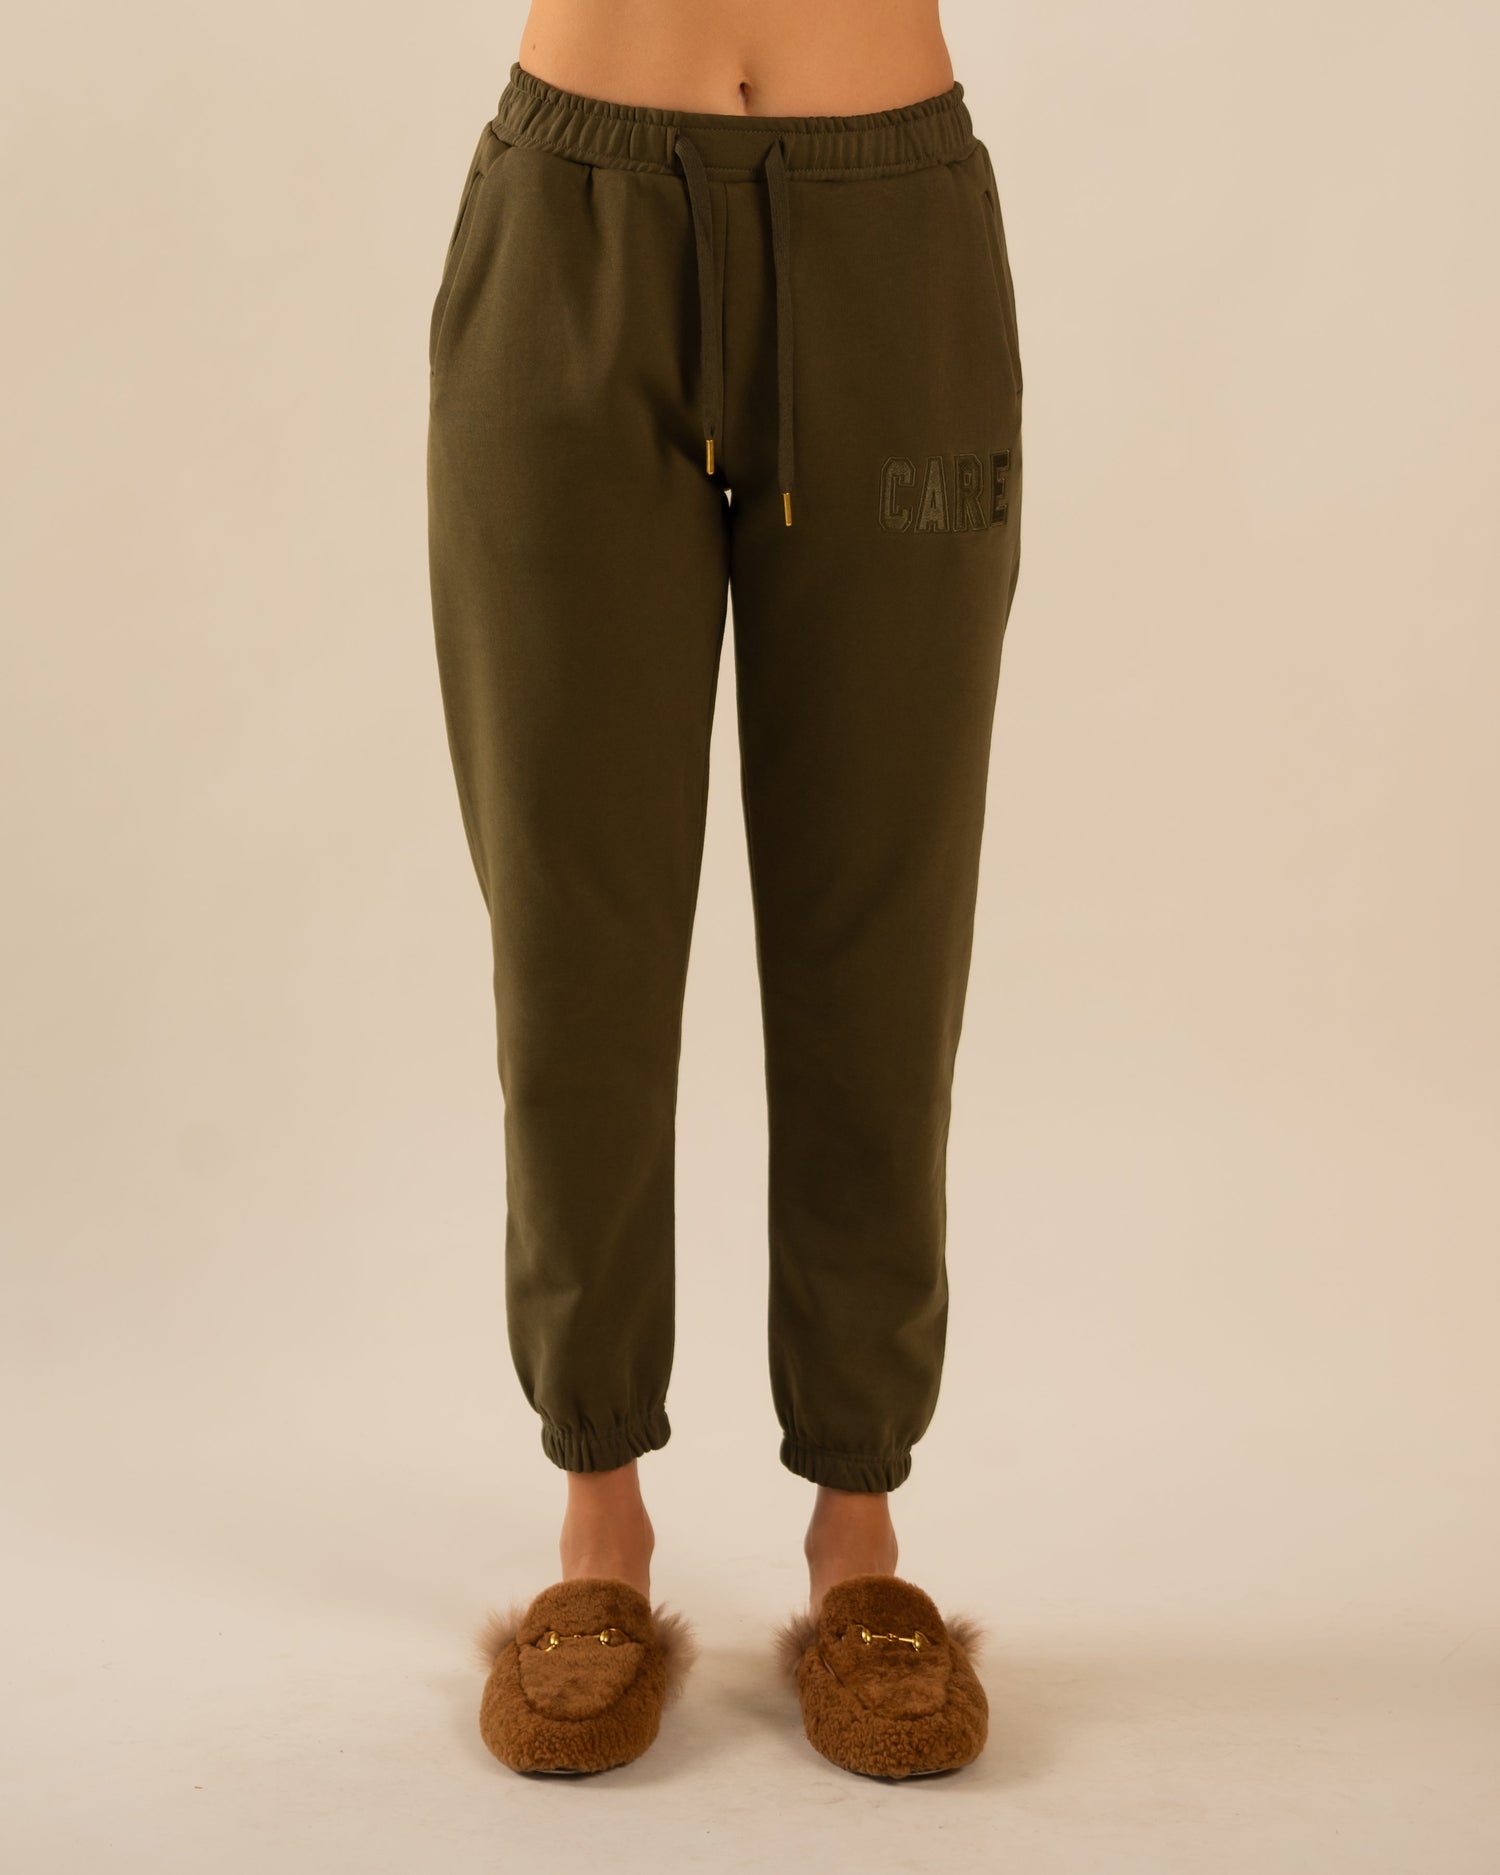 CARE Classic Sweatpants - Forest